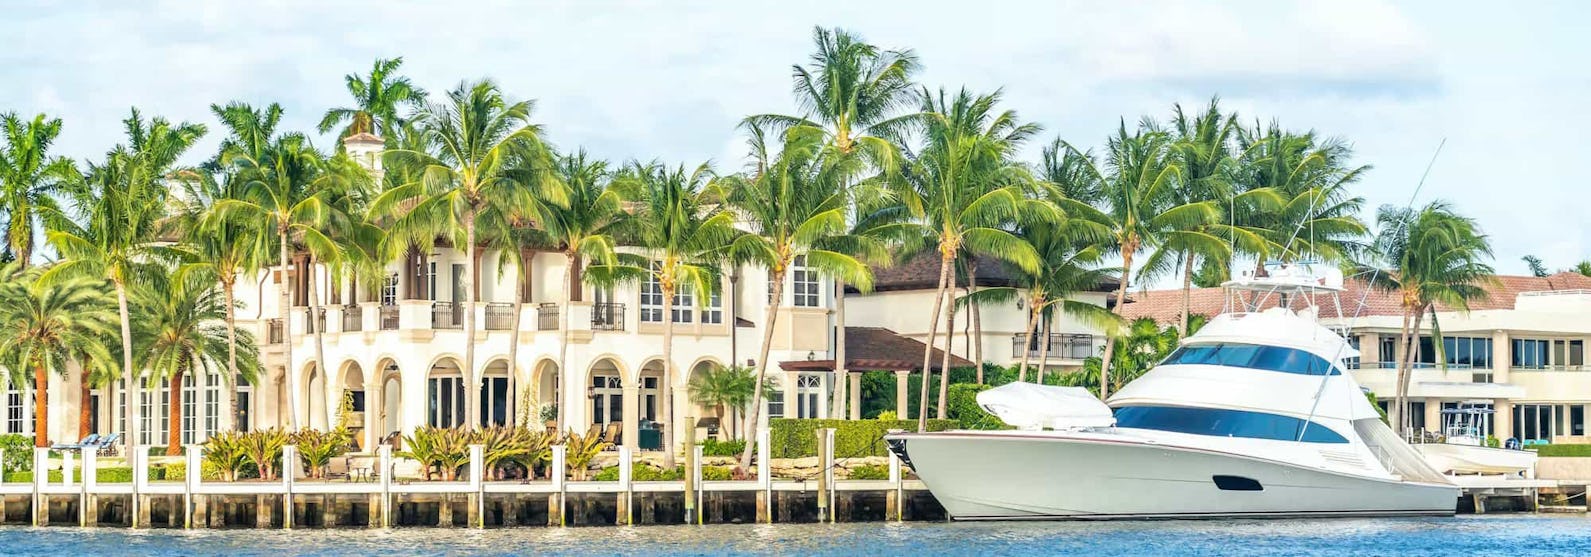 Luxury waterfront mansion in Fort Lauderdale Florida